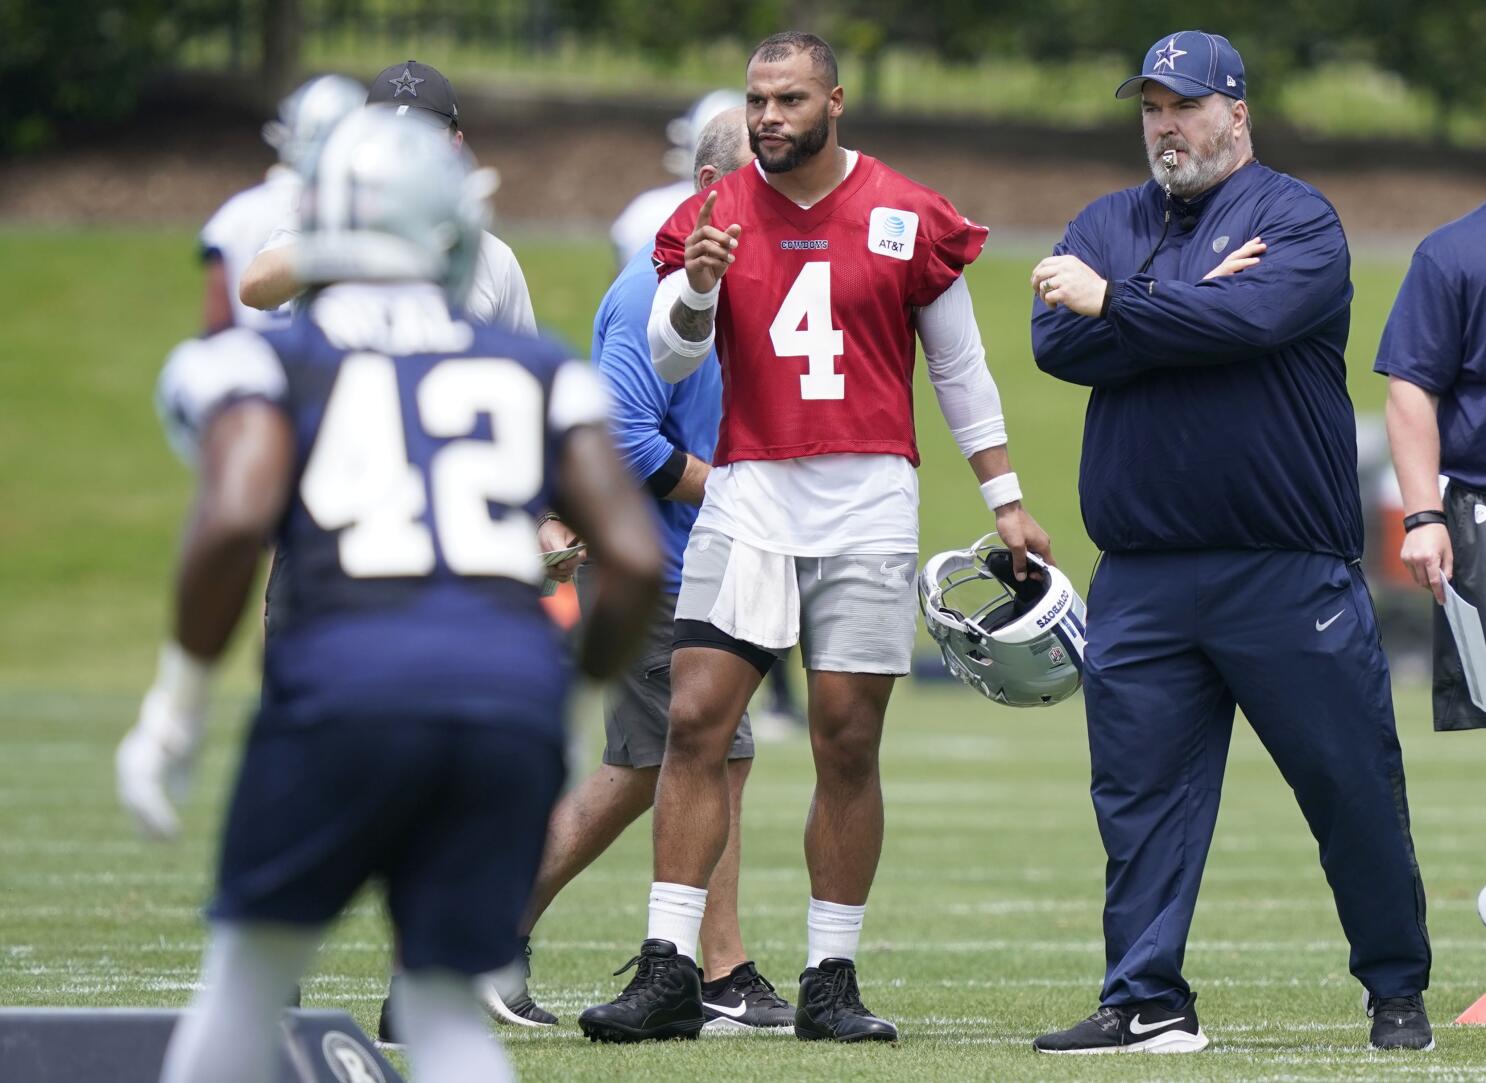 Cowboys will be featured team on HBO's 'Hard Knocks' - Los Angeles Times